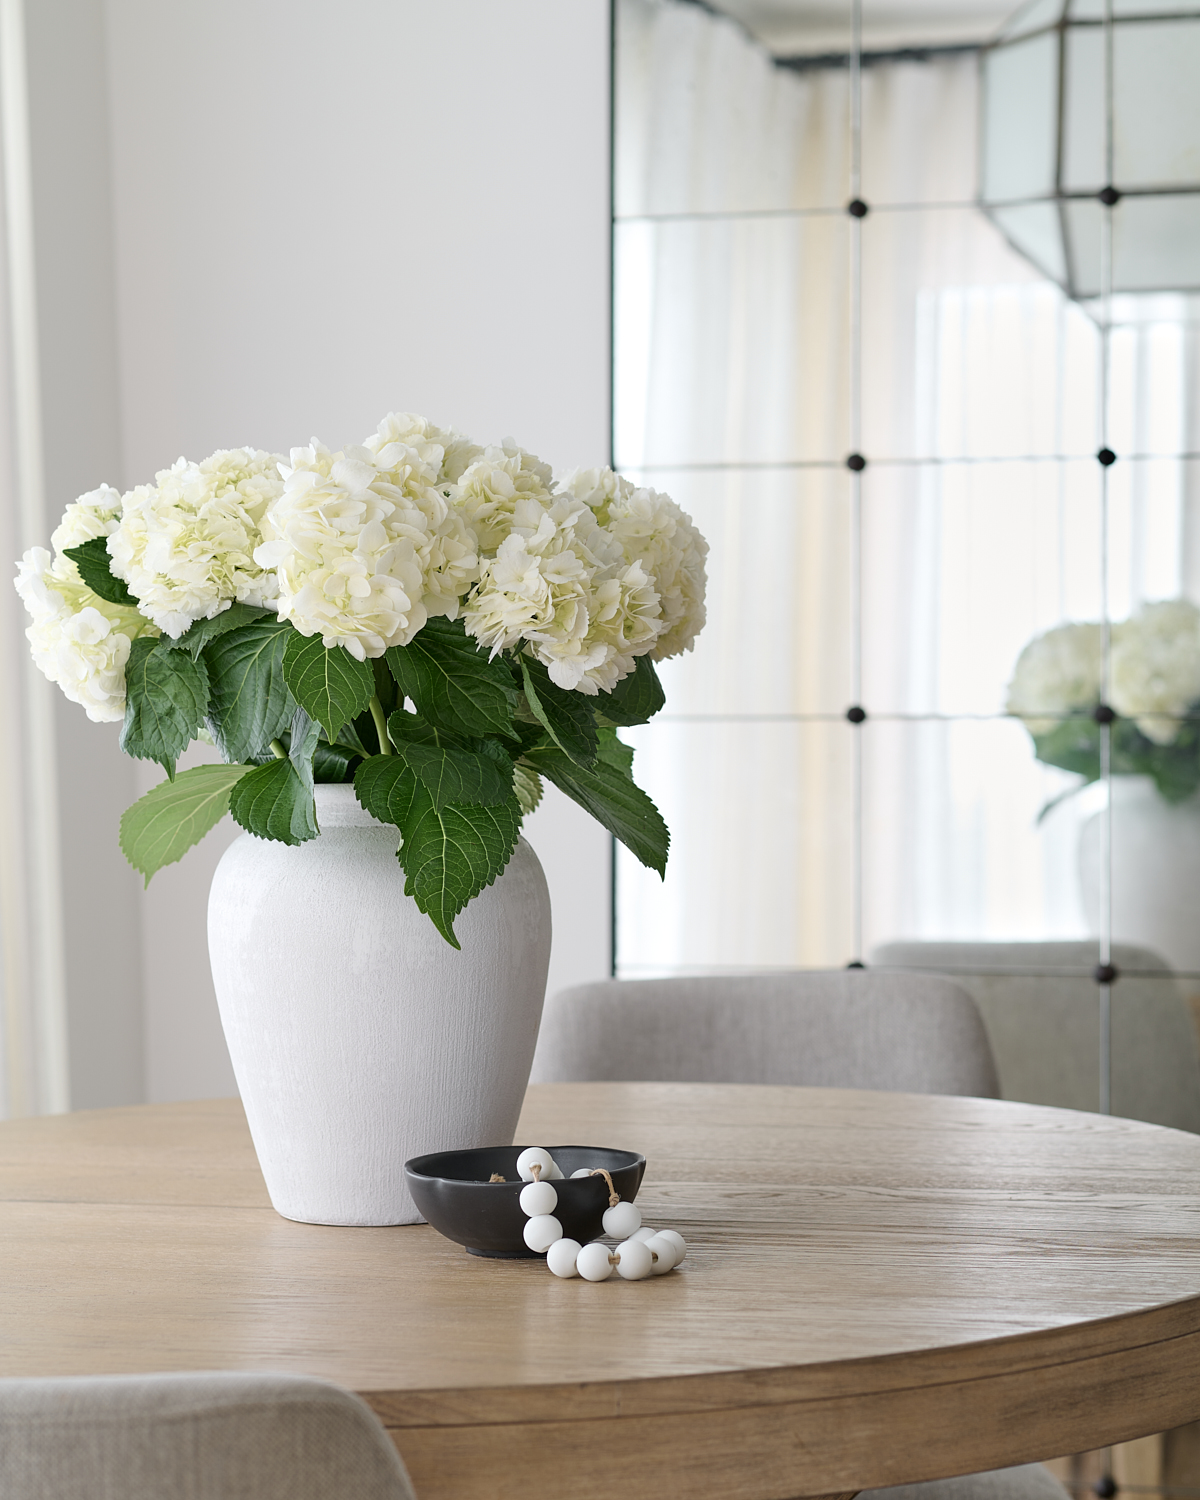 White hydrangeas in white vase on wooden dining table with dark bowl and white beads next to it